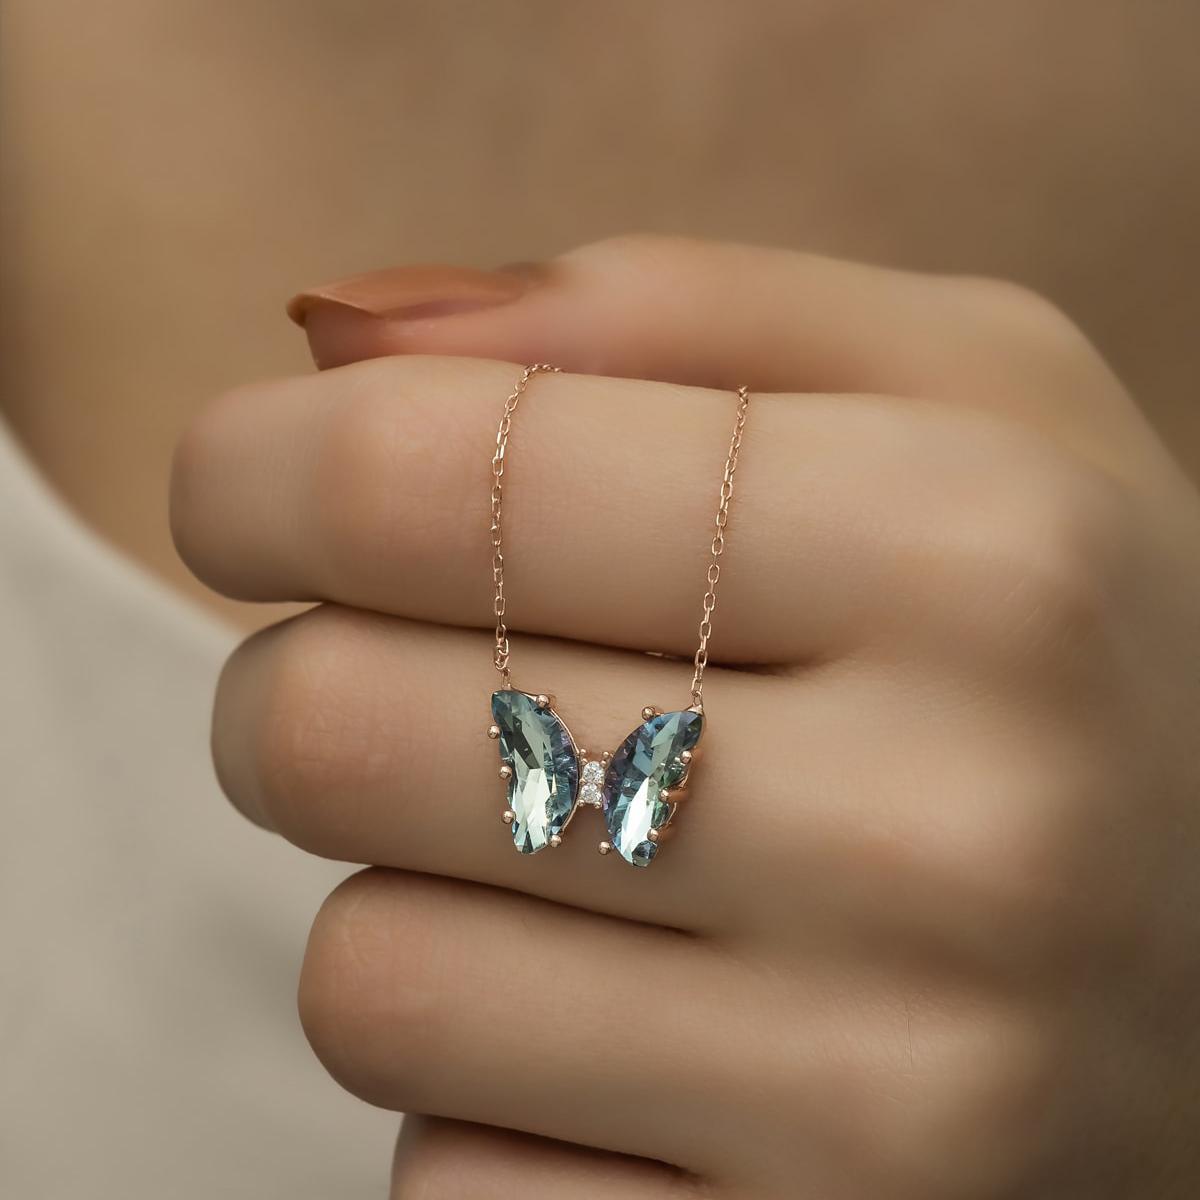 Blue Aquamarine Butterfly Necklace • Aquamarine Birthstone Necklace - Trending Silver Gifts